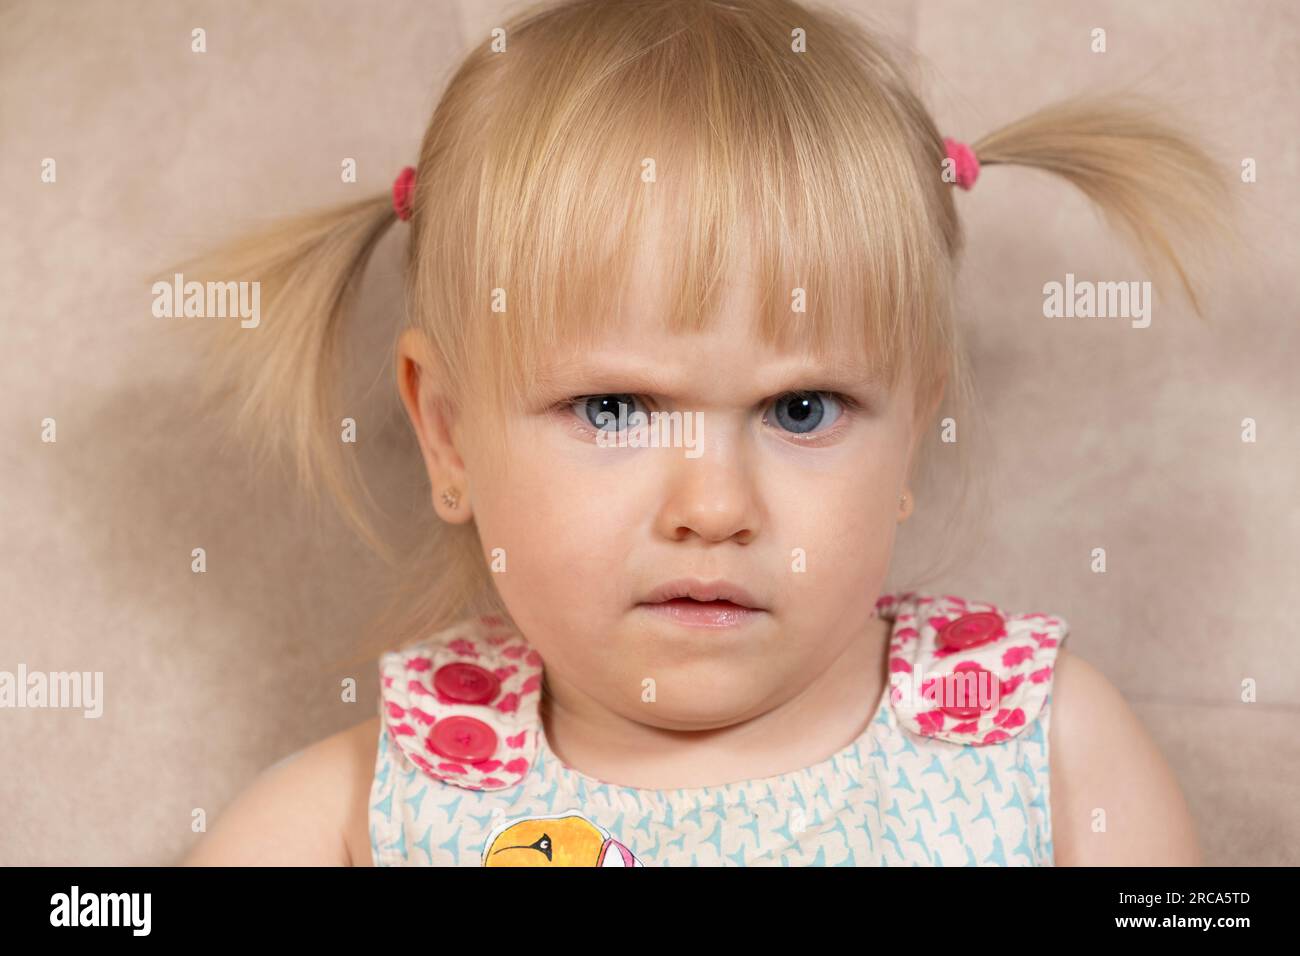 Portrait of a 2-year-old girl frowning suspiciously looking at the camera. Stock Photo